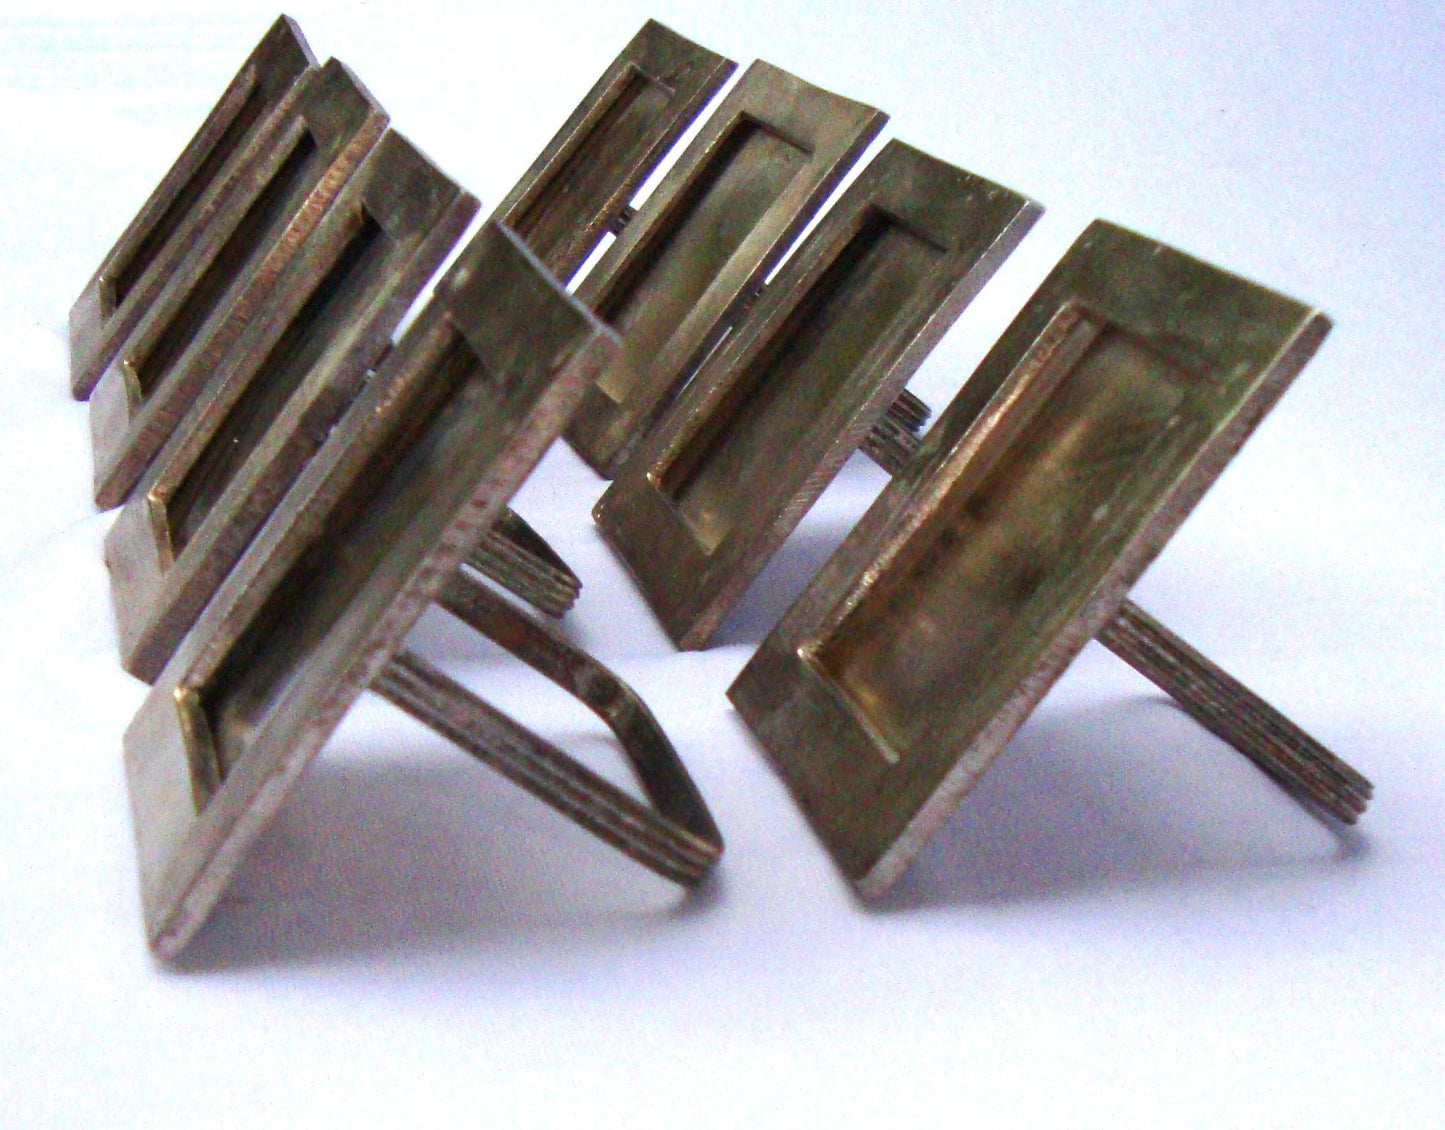 [Sold] Silver Plated Place Holders Napkin Rings - 8